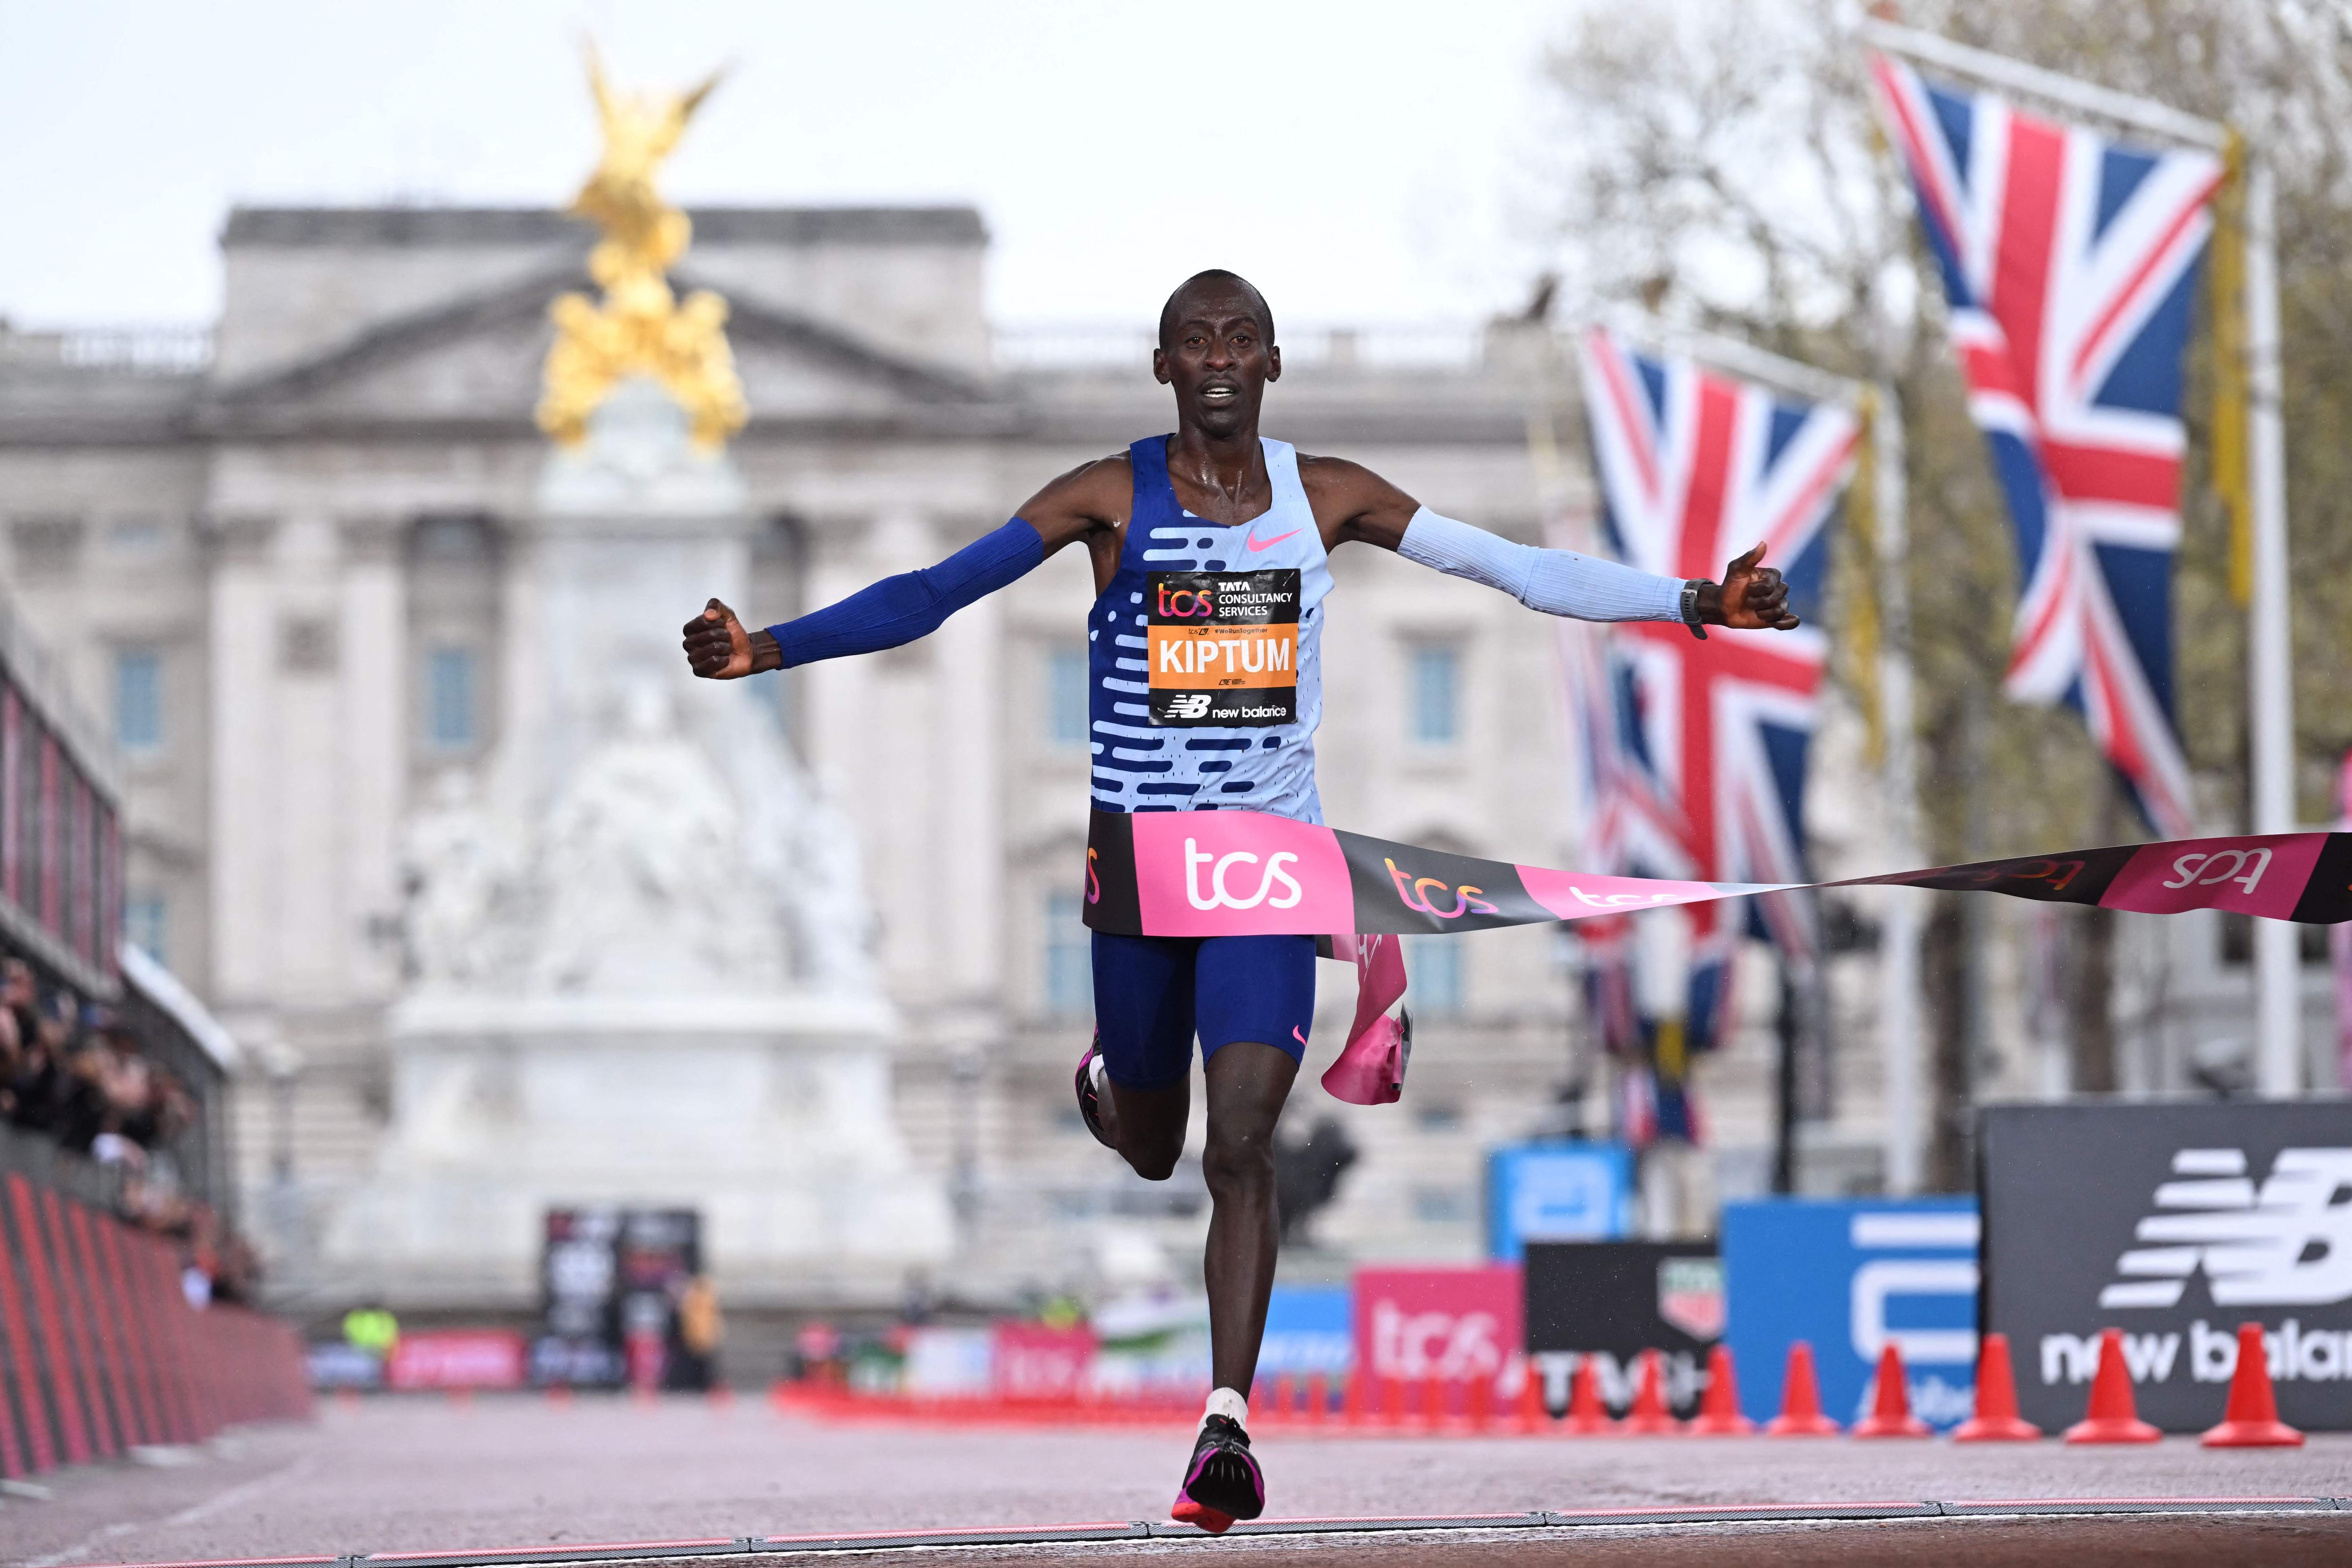 An extraordinary performance saw Kiptum triumph on the streets of London